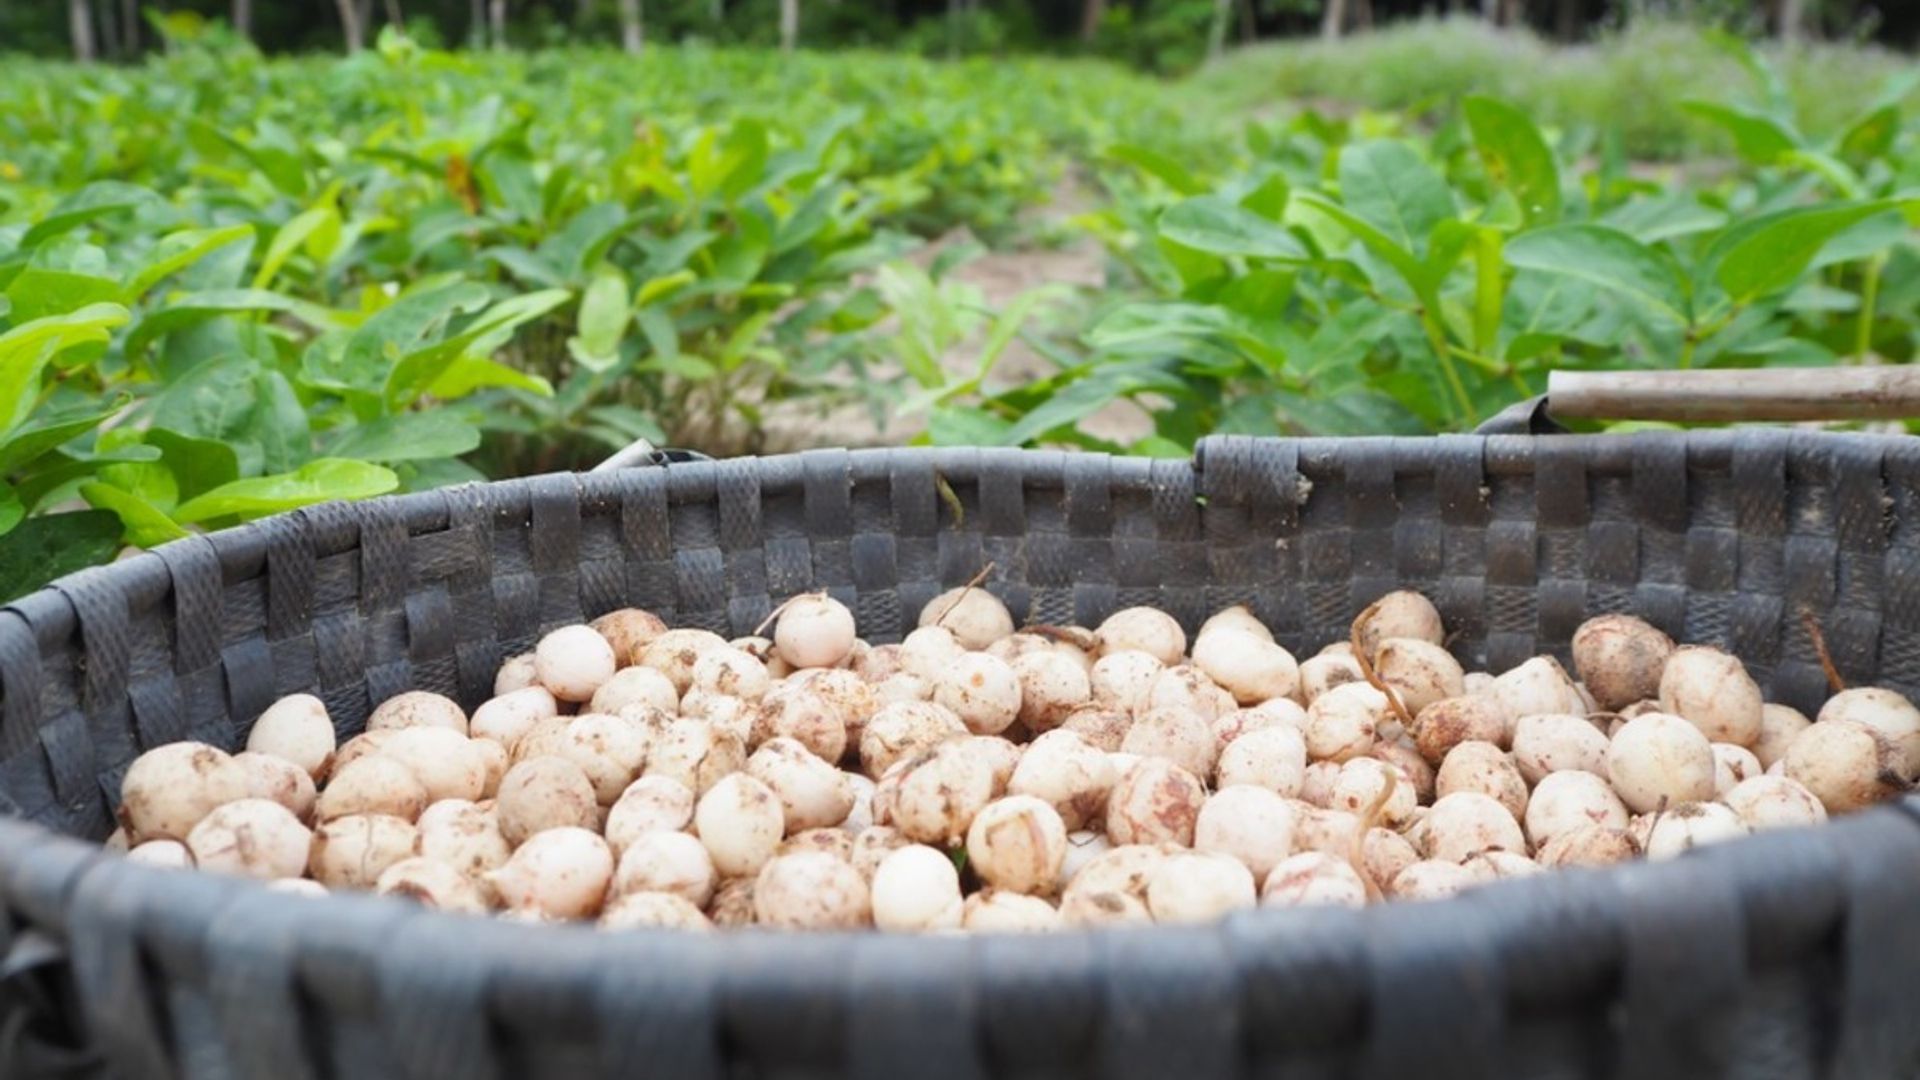 Image of bambara nuts in a basket after harvest